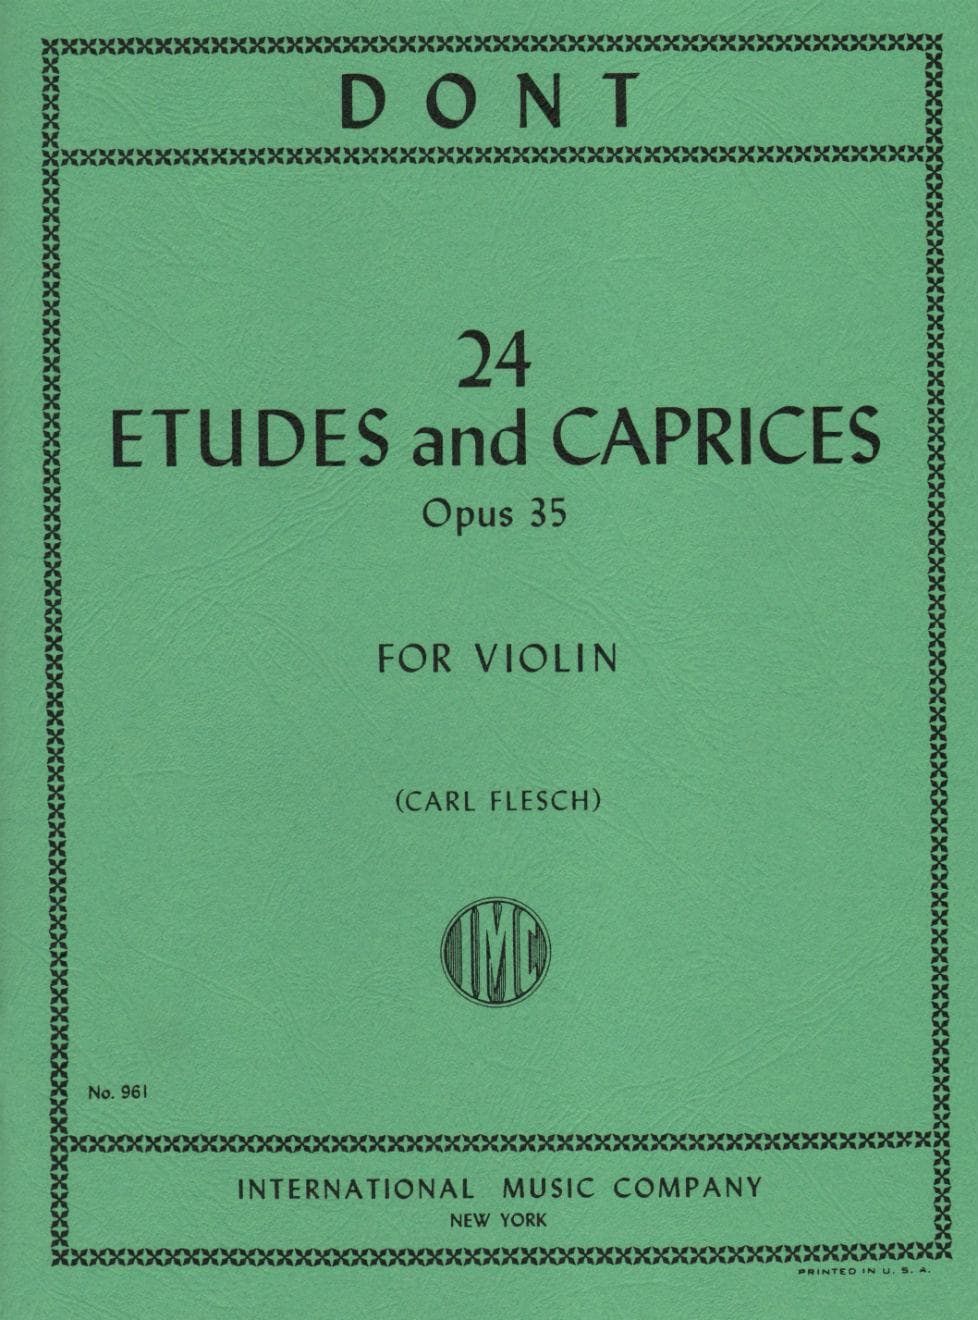 Dont, Jakob - 24 Etudes and Caprices, Op 35 - Violin solo - edited by Carl Flesch - International Edition